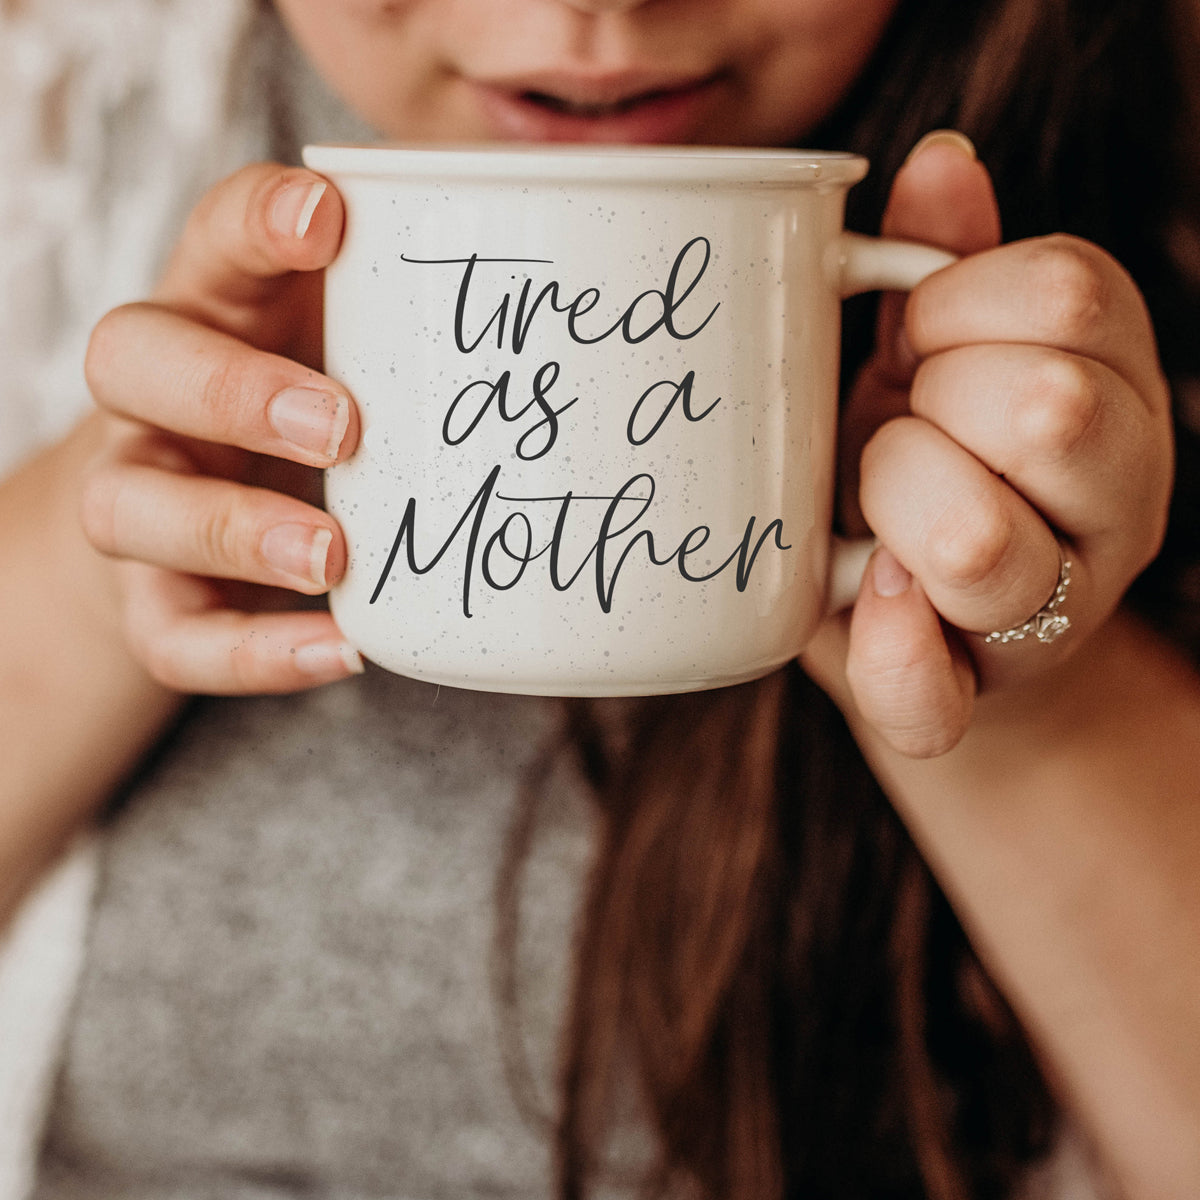 Tired as a Mother Ceramic Coffee Mugs for neutral kitchen